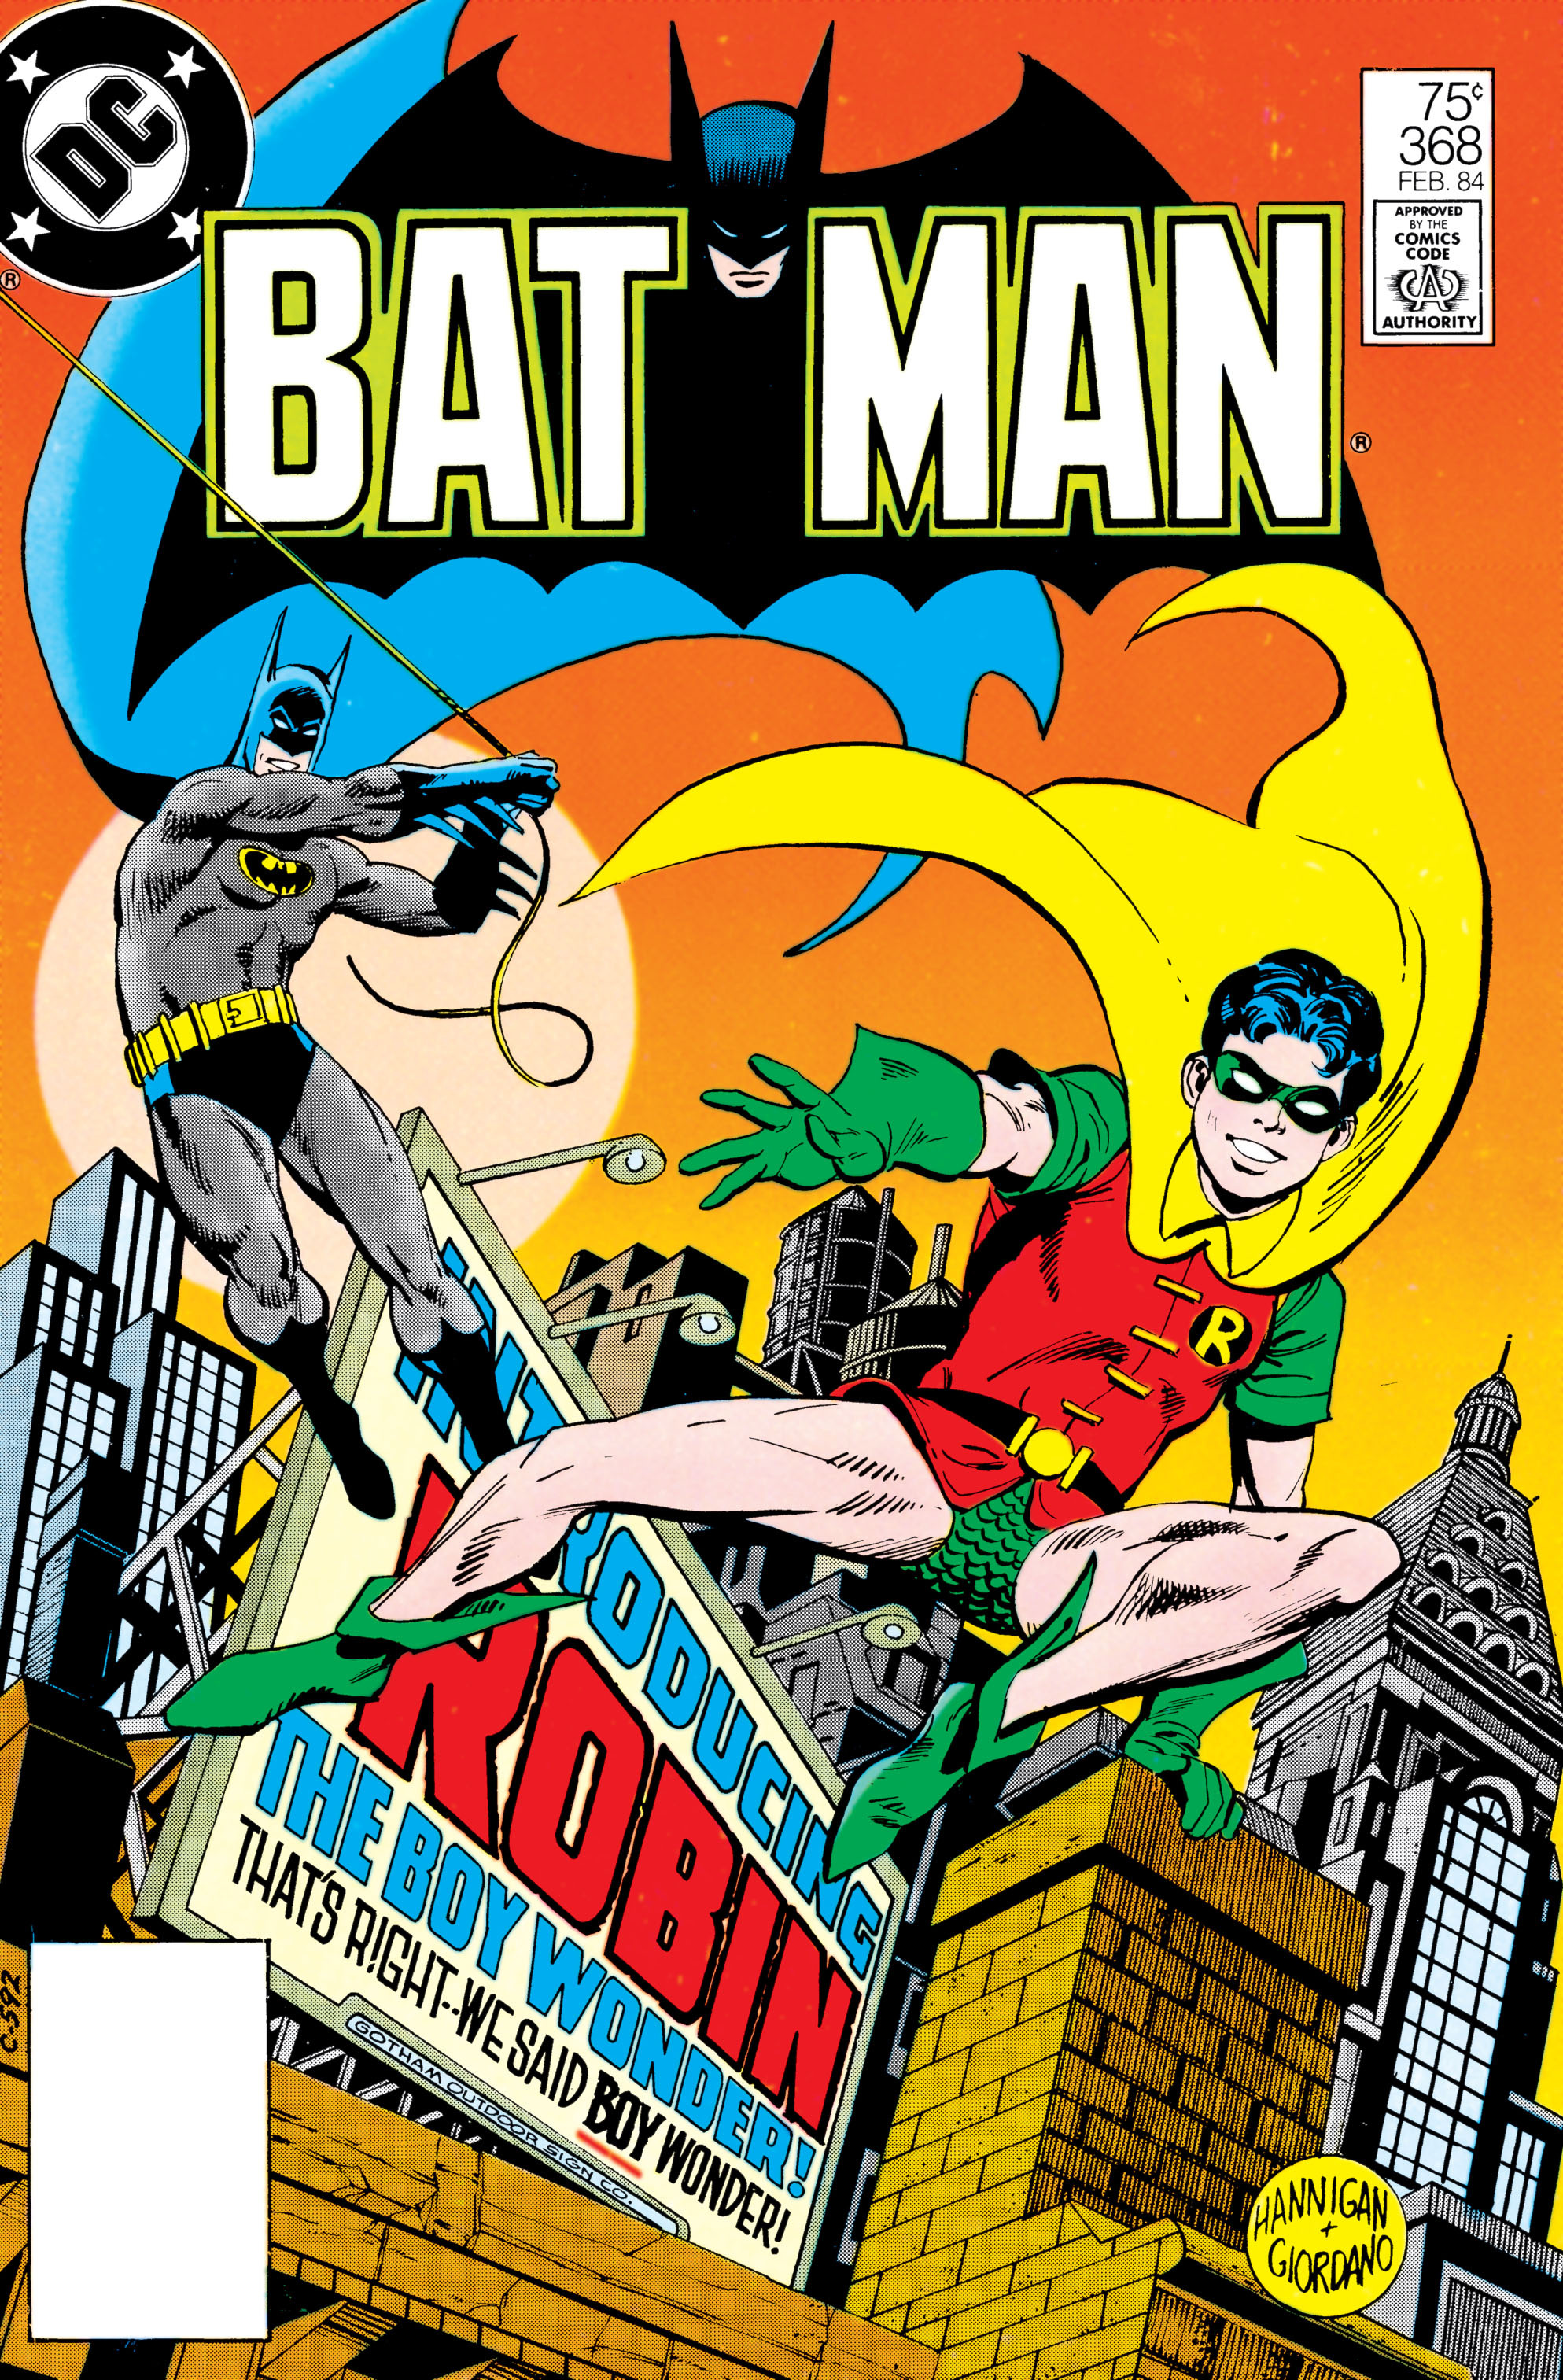 Batman 1940 Issue 368 | Read Batman 1940 Issue 368 comic online in high  quality. Read Full Comic online for free - Read comics online in high  quality .| READ COMIC ONLINE